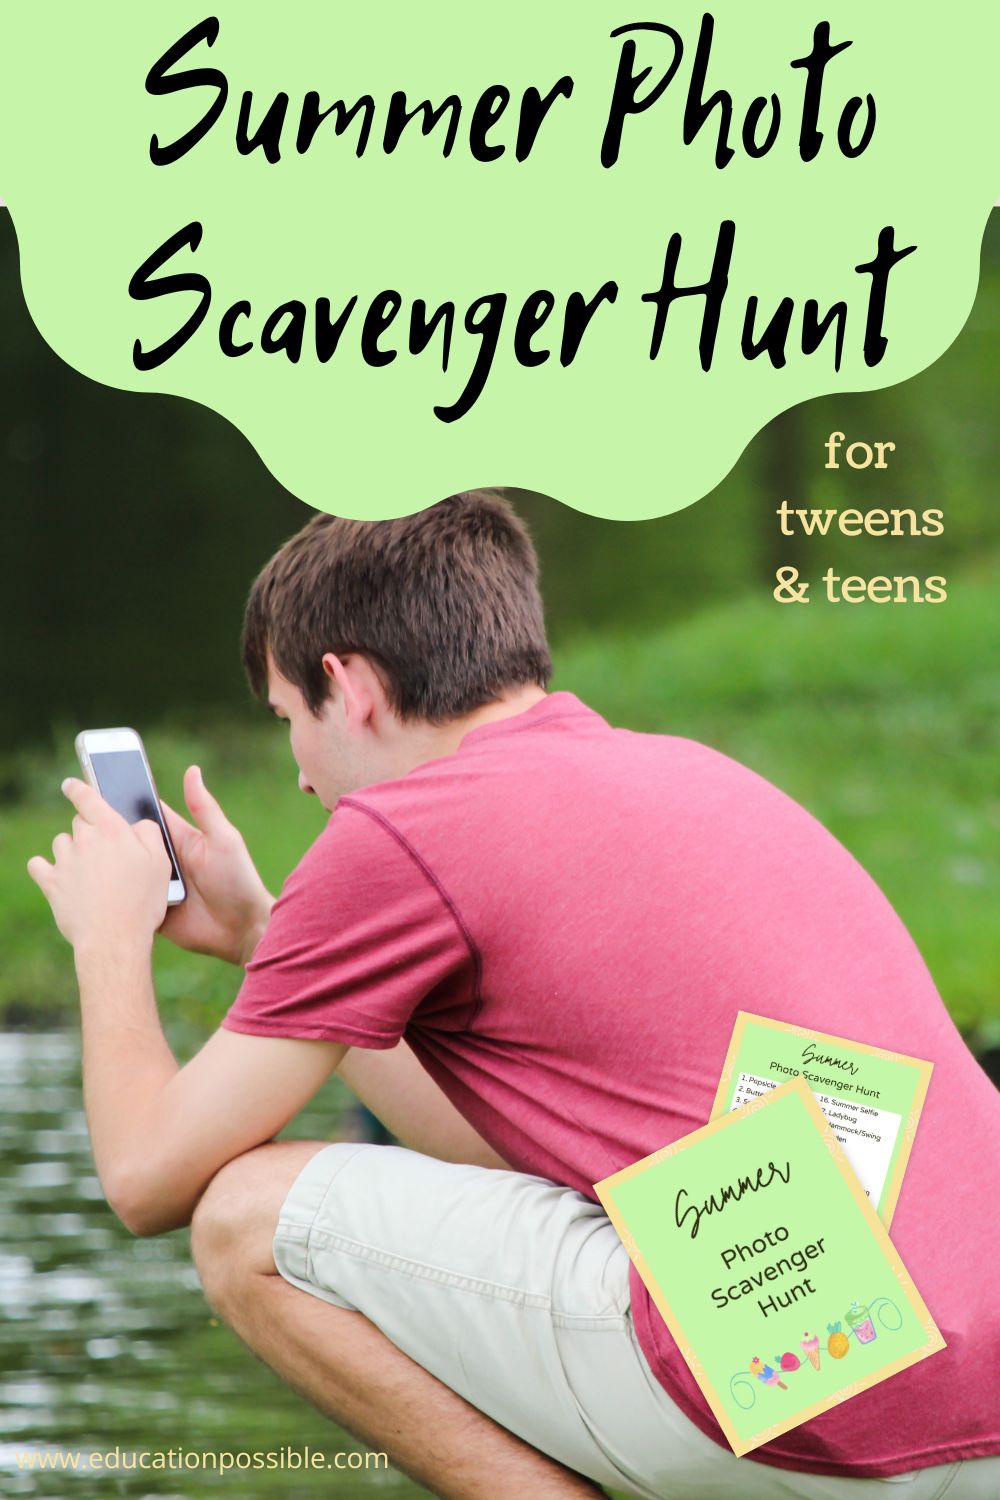 Teen boy wearing a red t-shirt and tan shorts bending at the edge of a pond taking a picture. Image of PDF scavenger hunt over image at bottom.